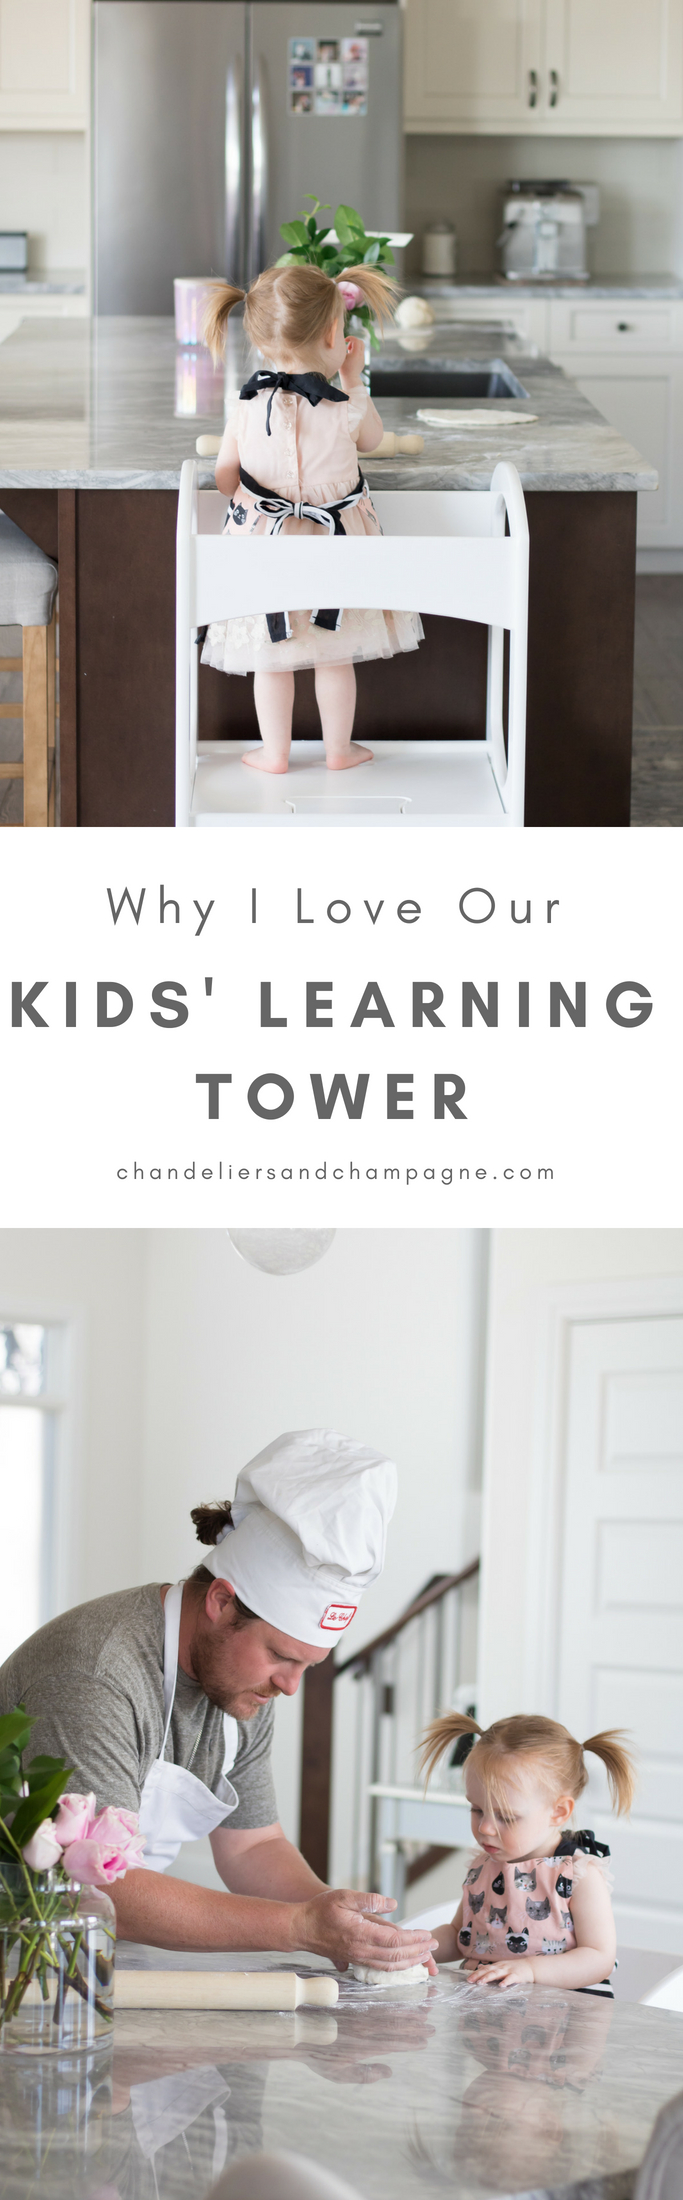 Why I love our kids' learning tower - Kitchen helper - Kids cooking in the kitchen 